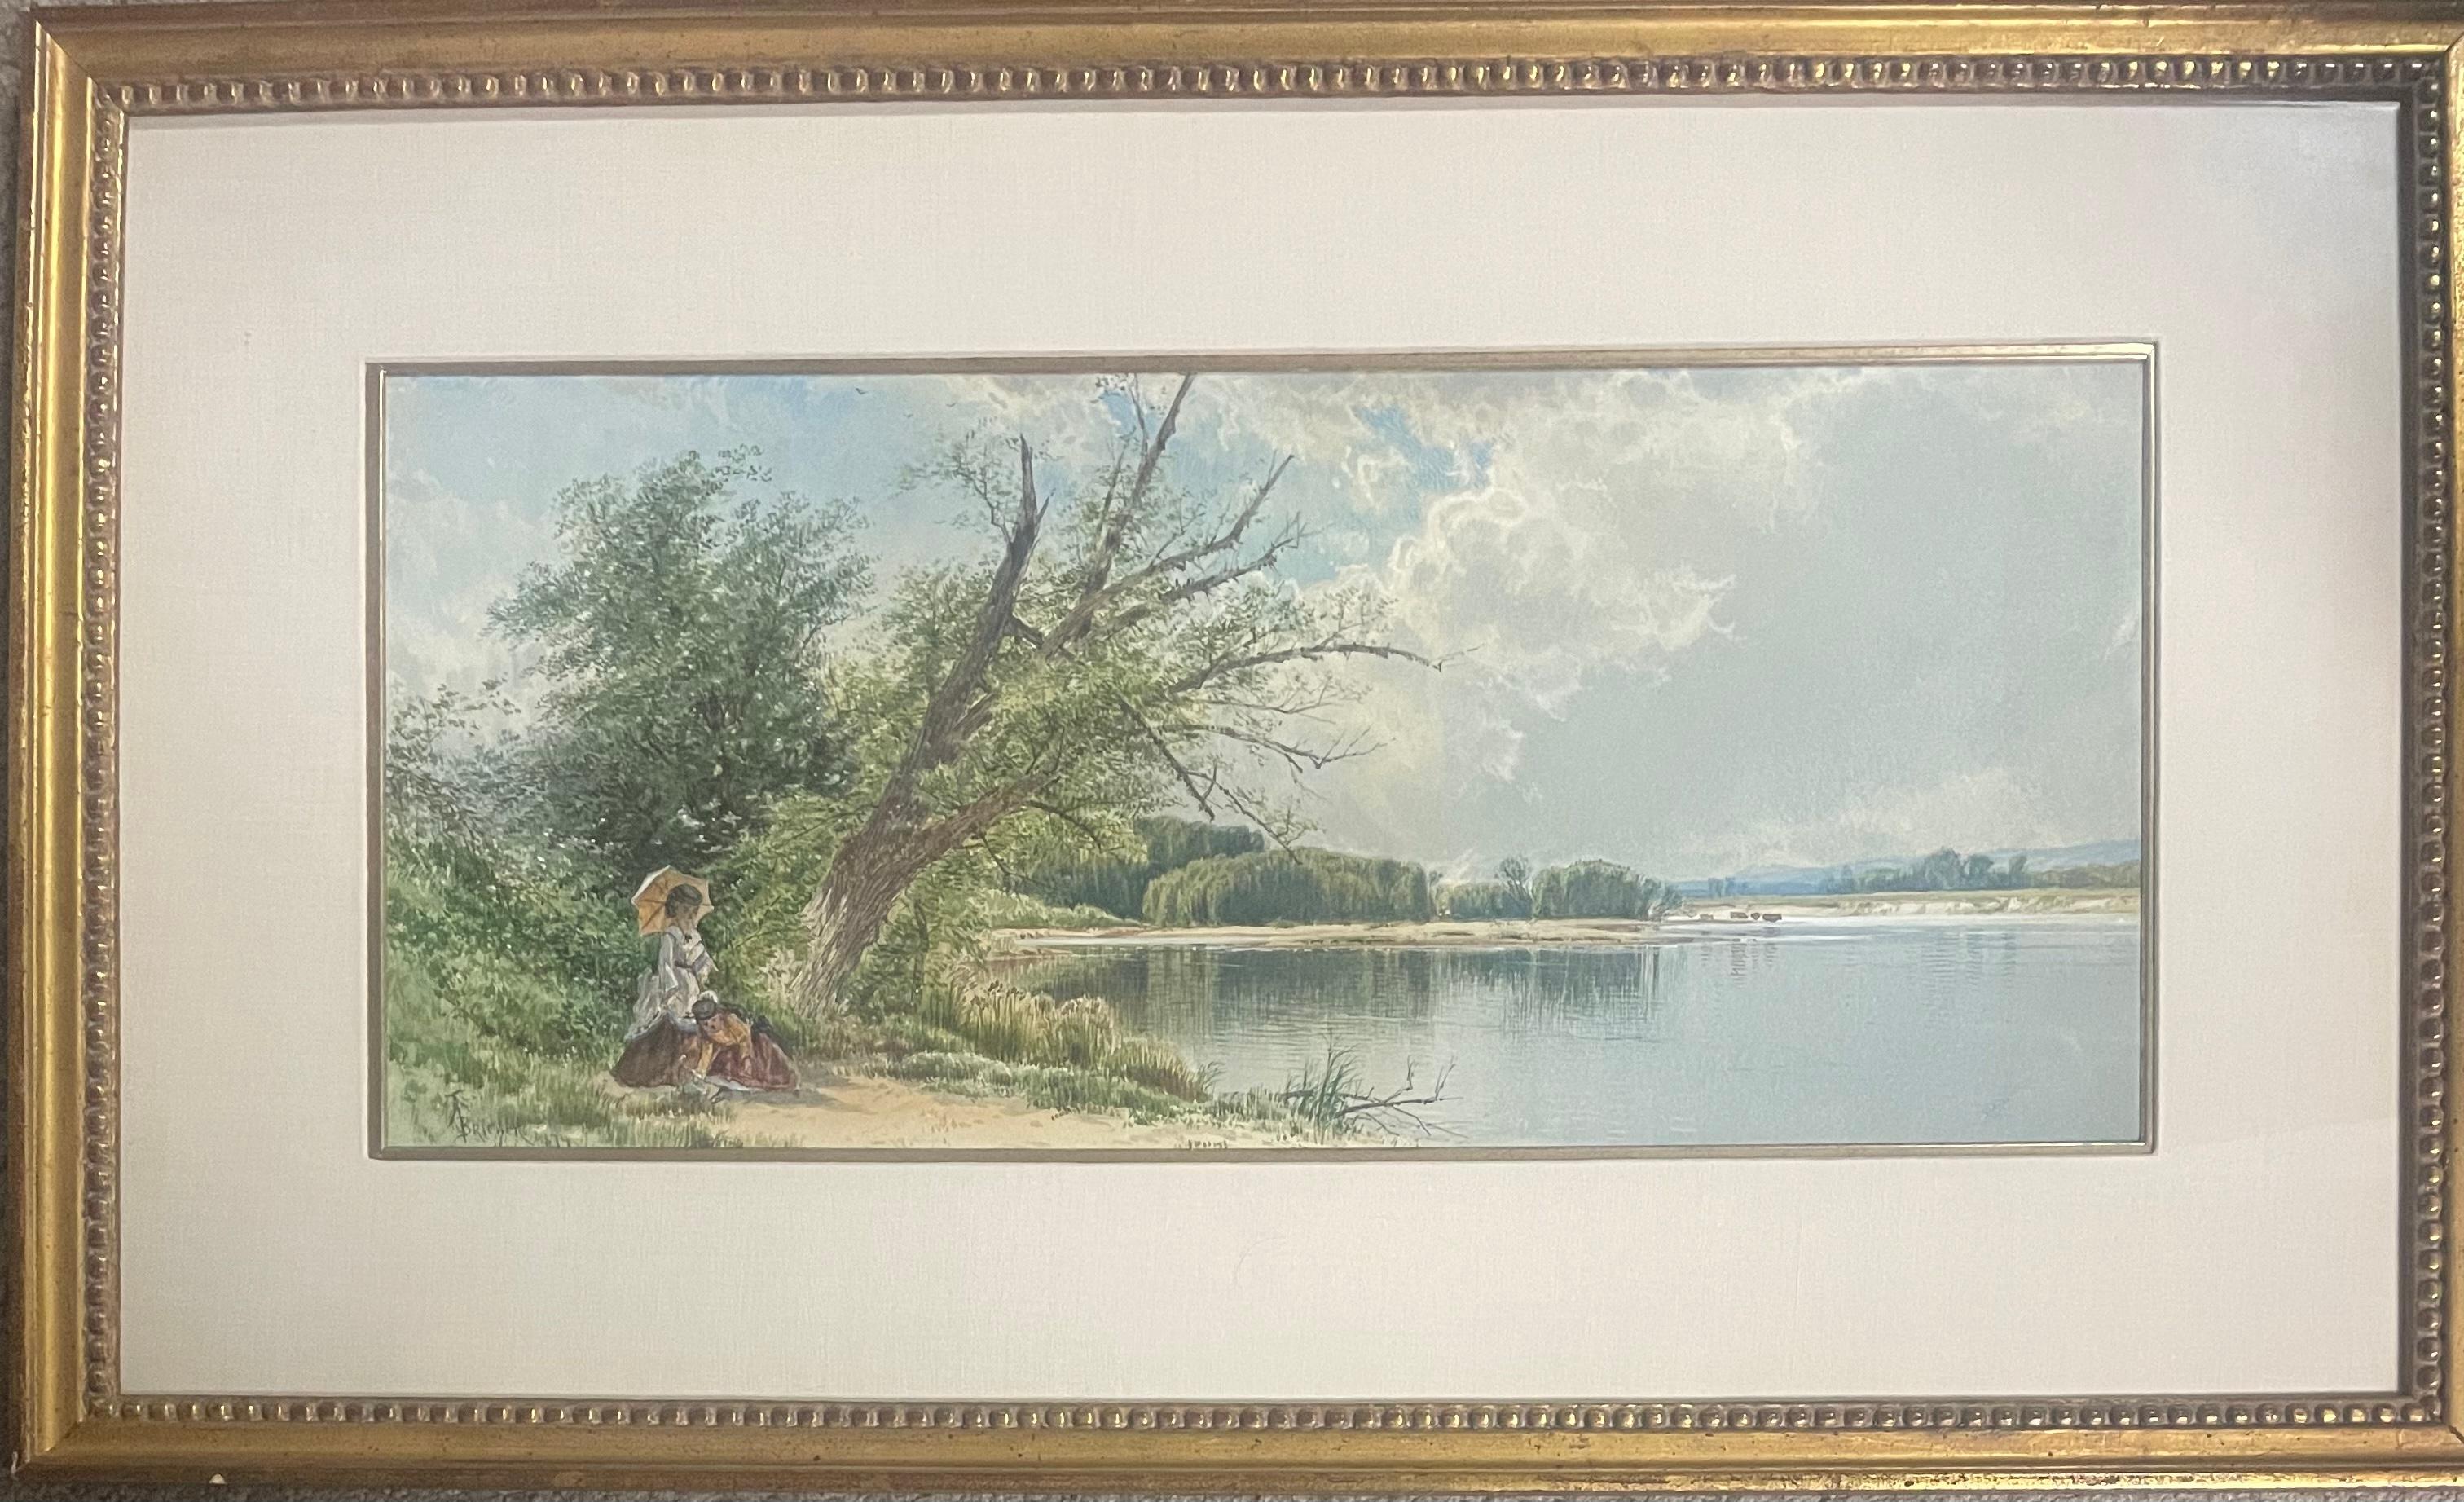 “The Afternoon Walker by the Pond” - Art by Alfred Thompson Bricher